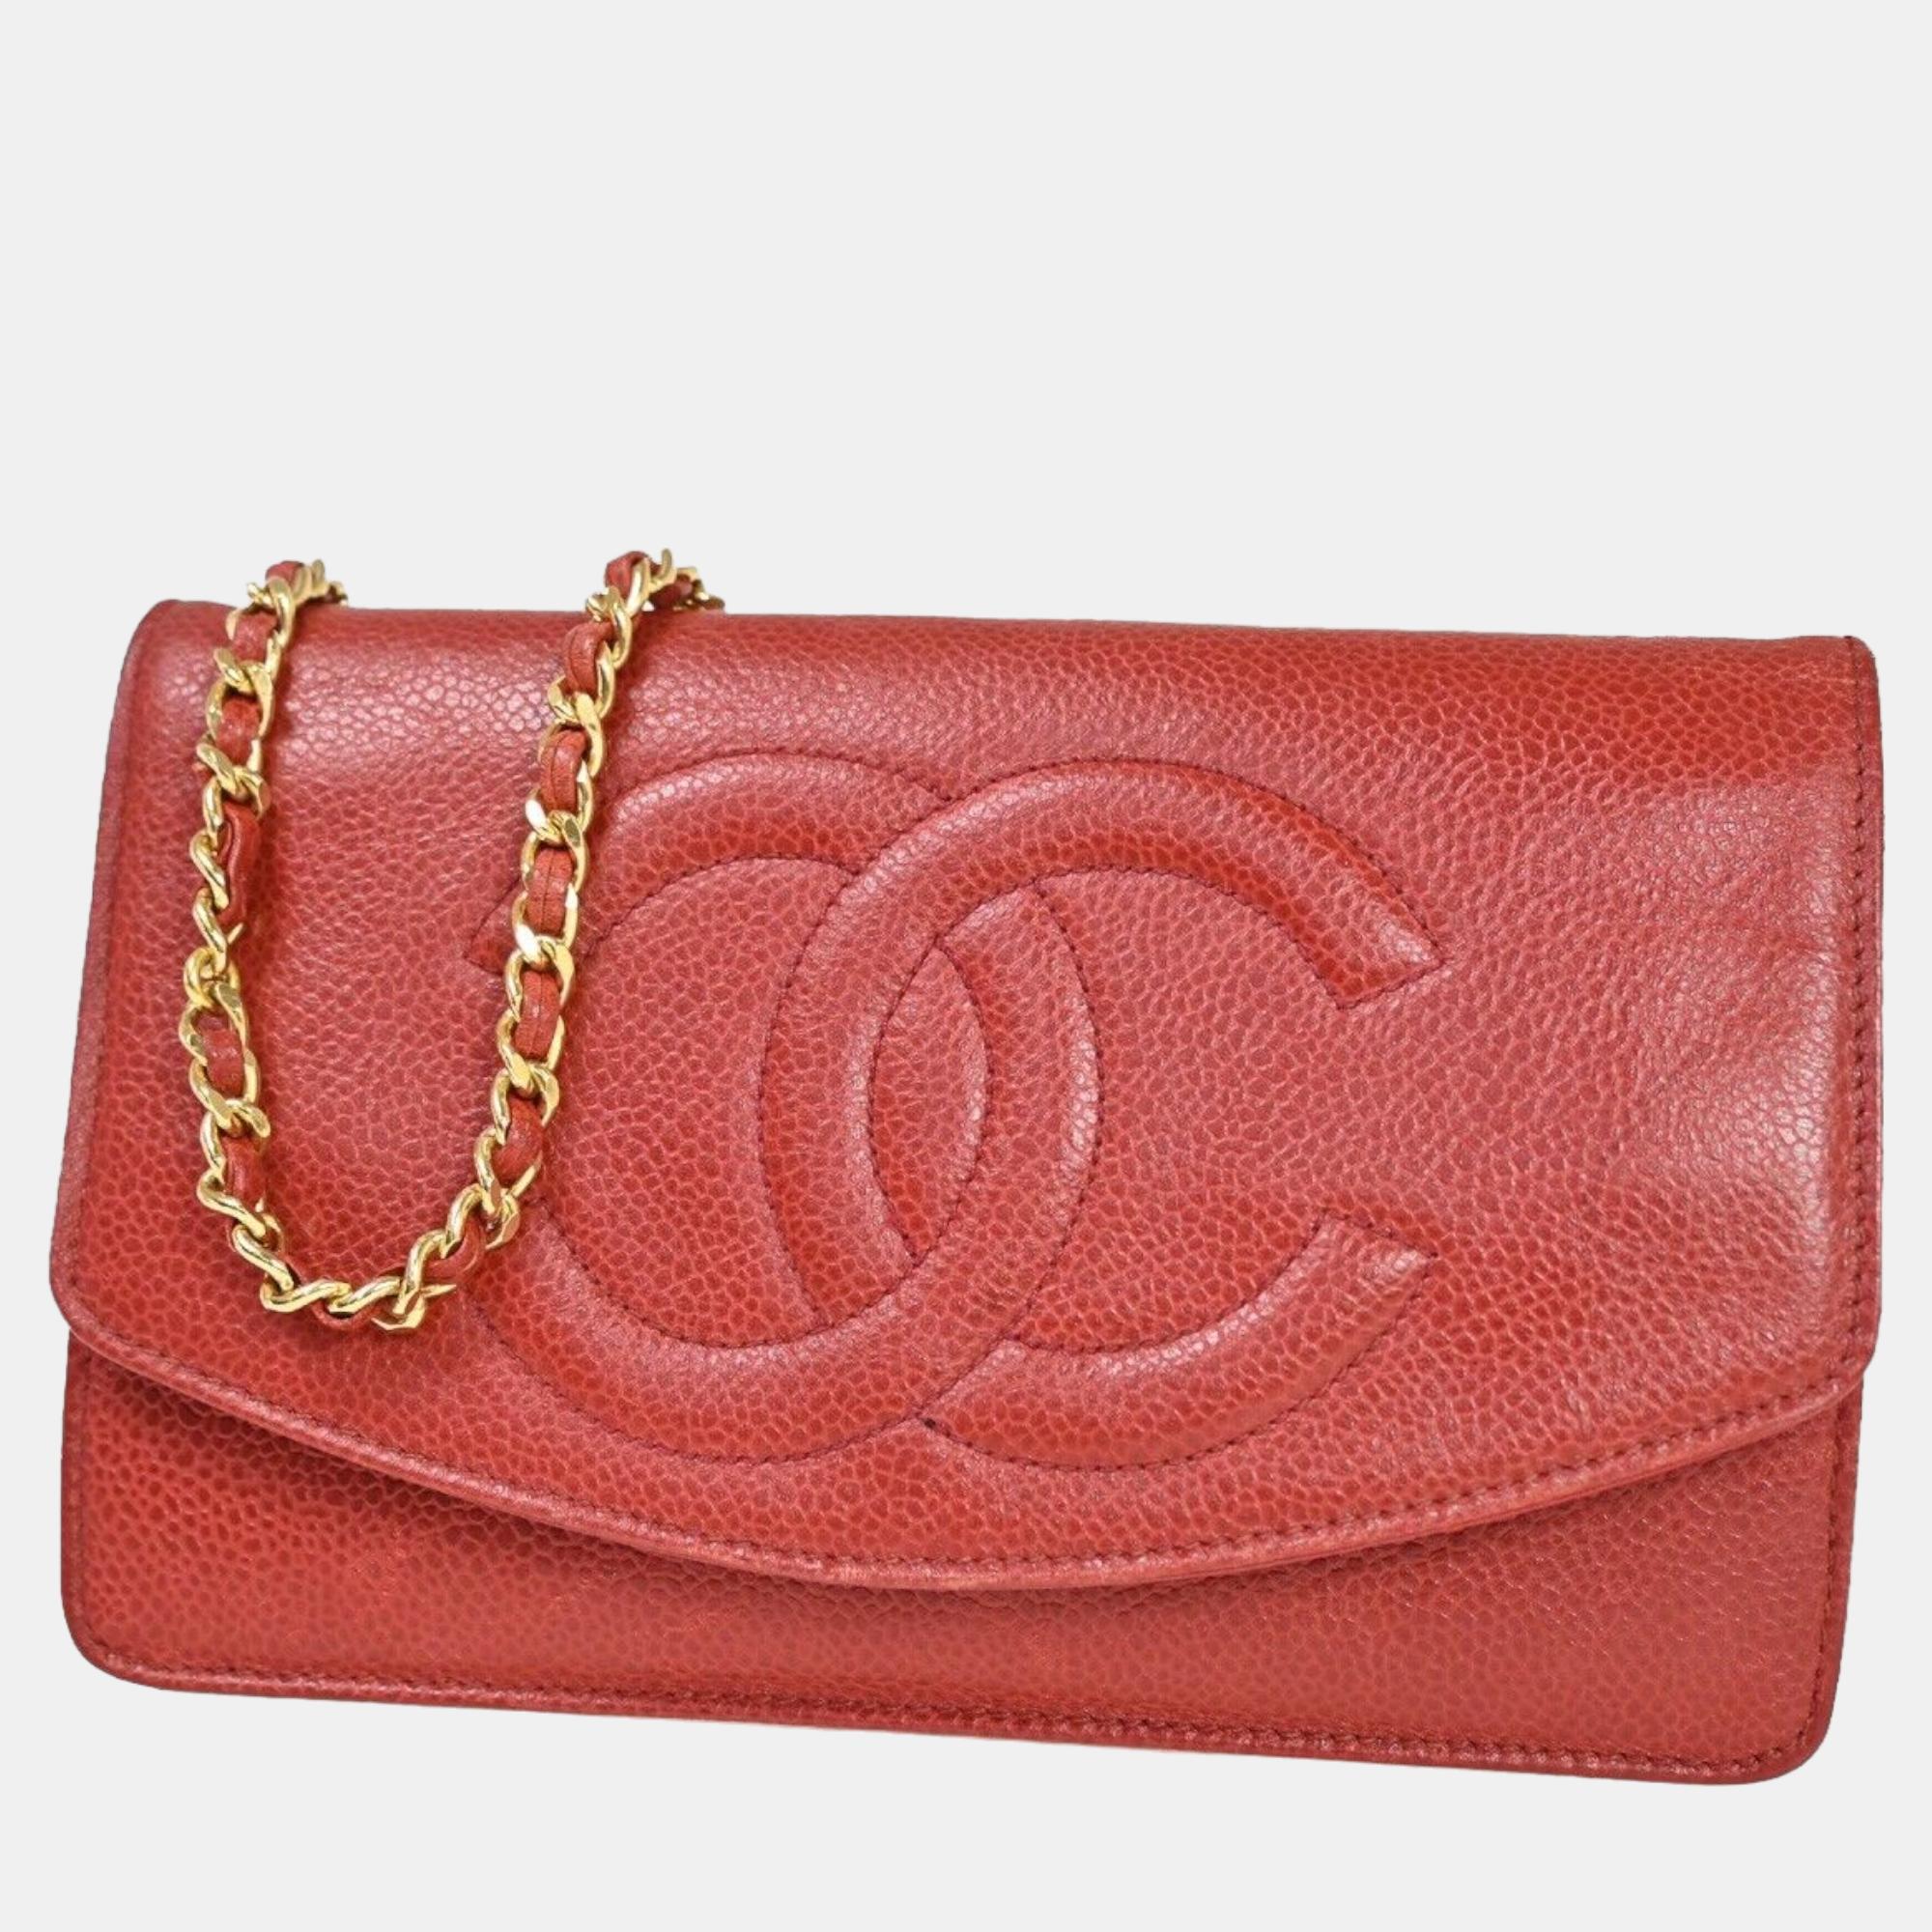 Chanel red leather wallet on chain handbag